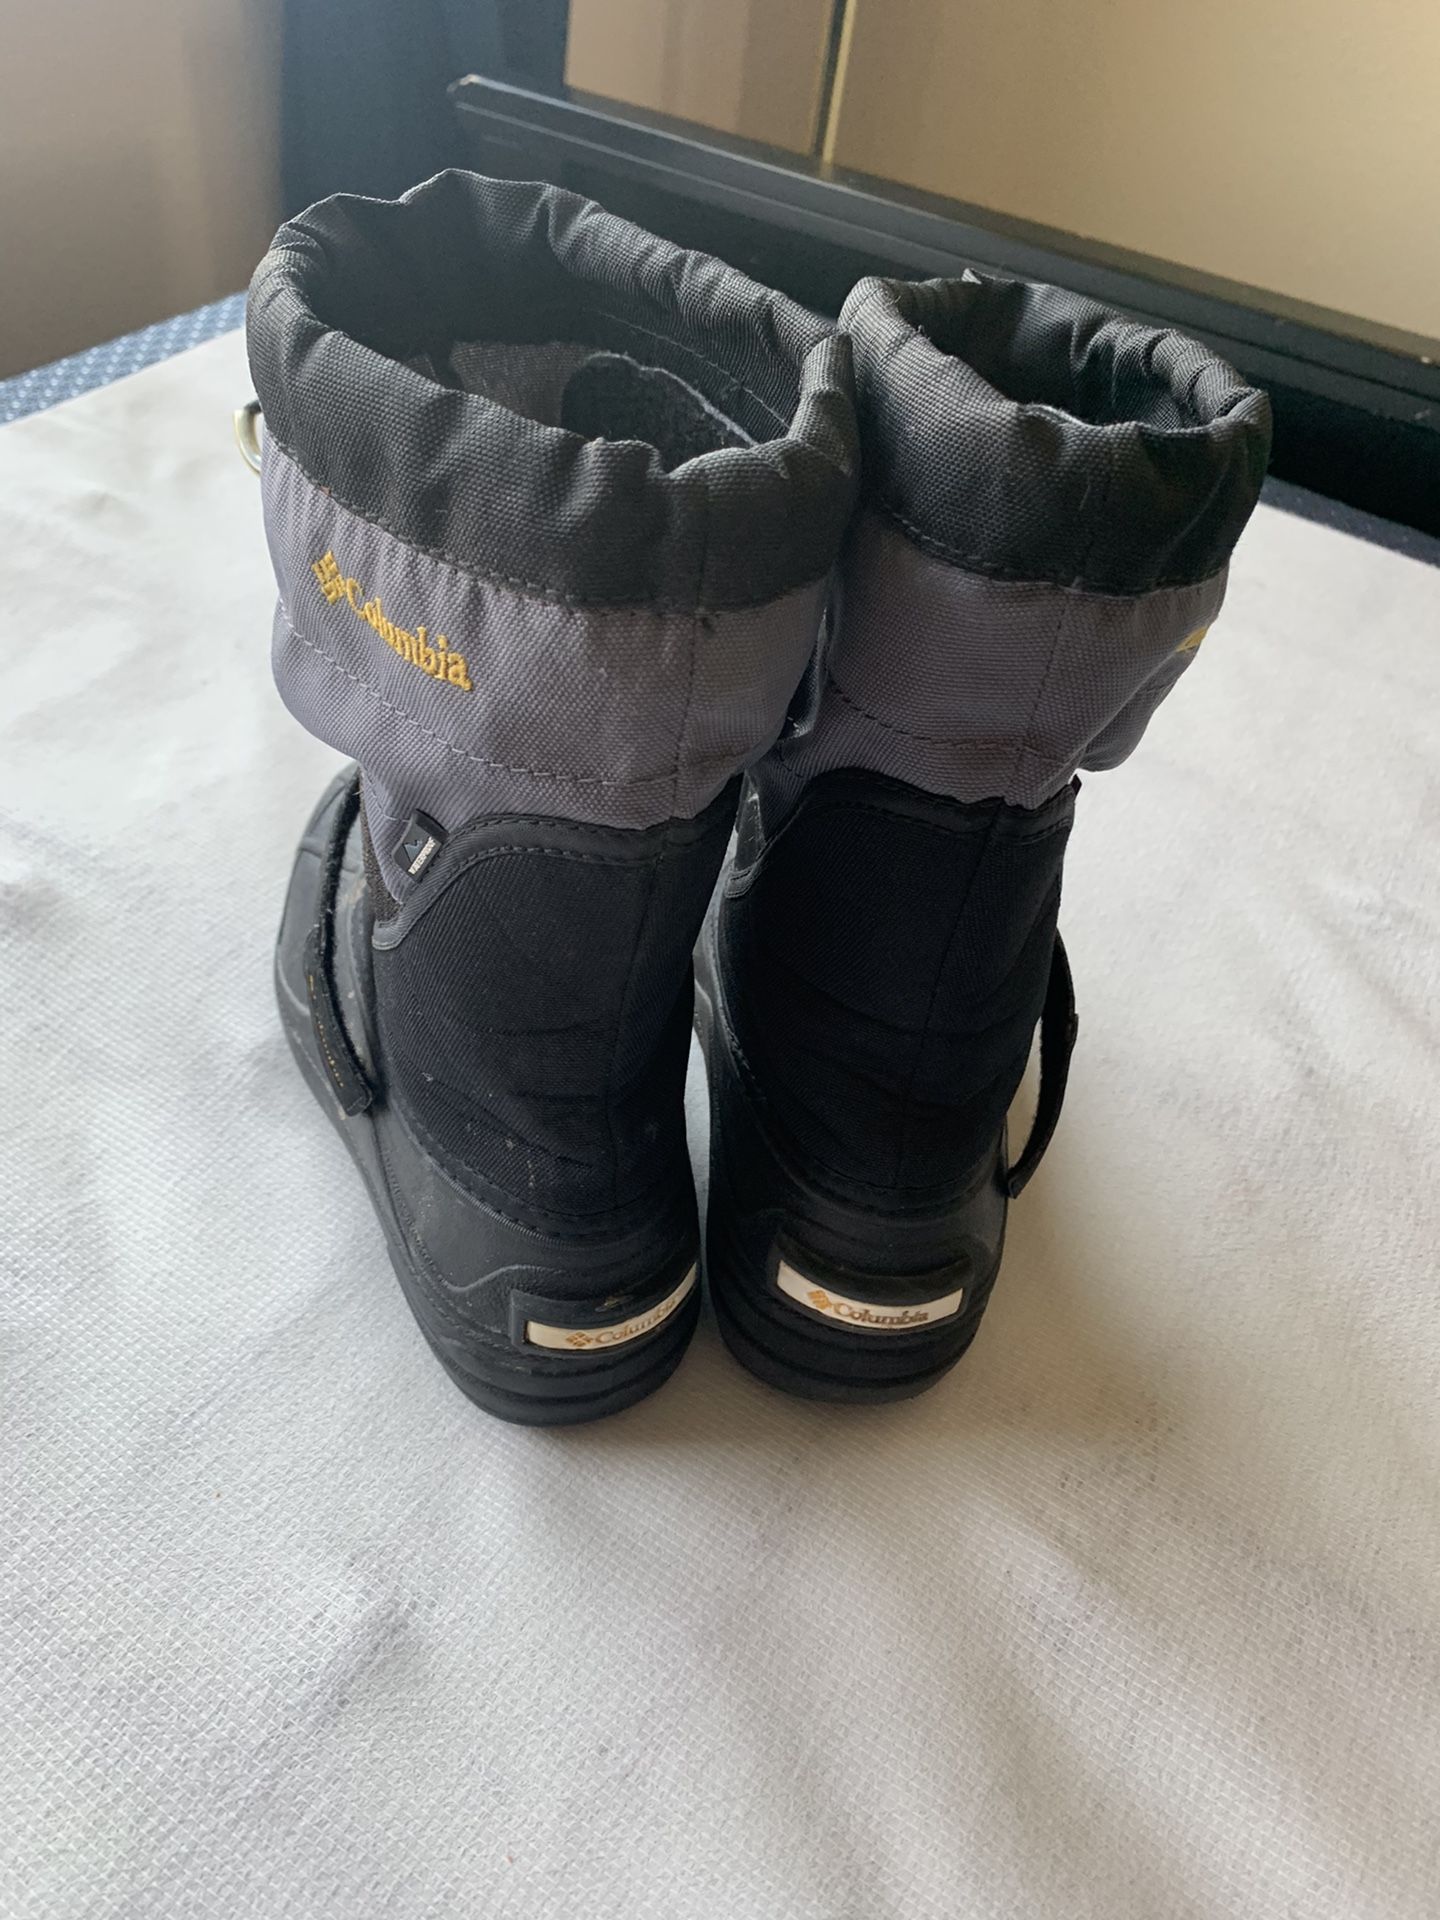 columbia snow boots size 1